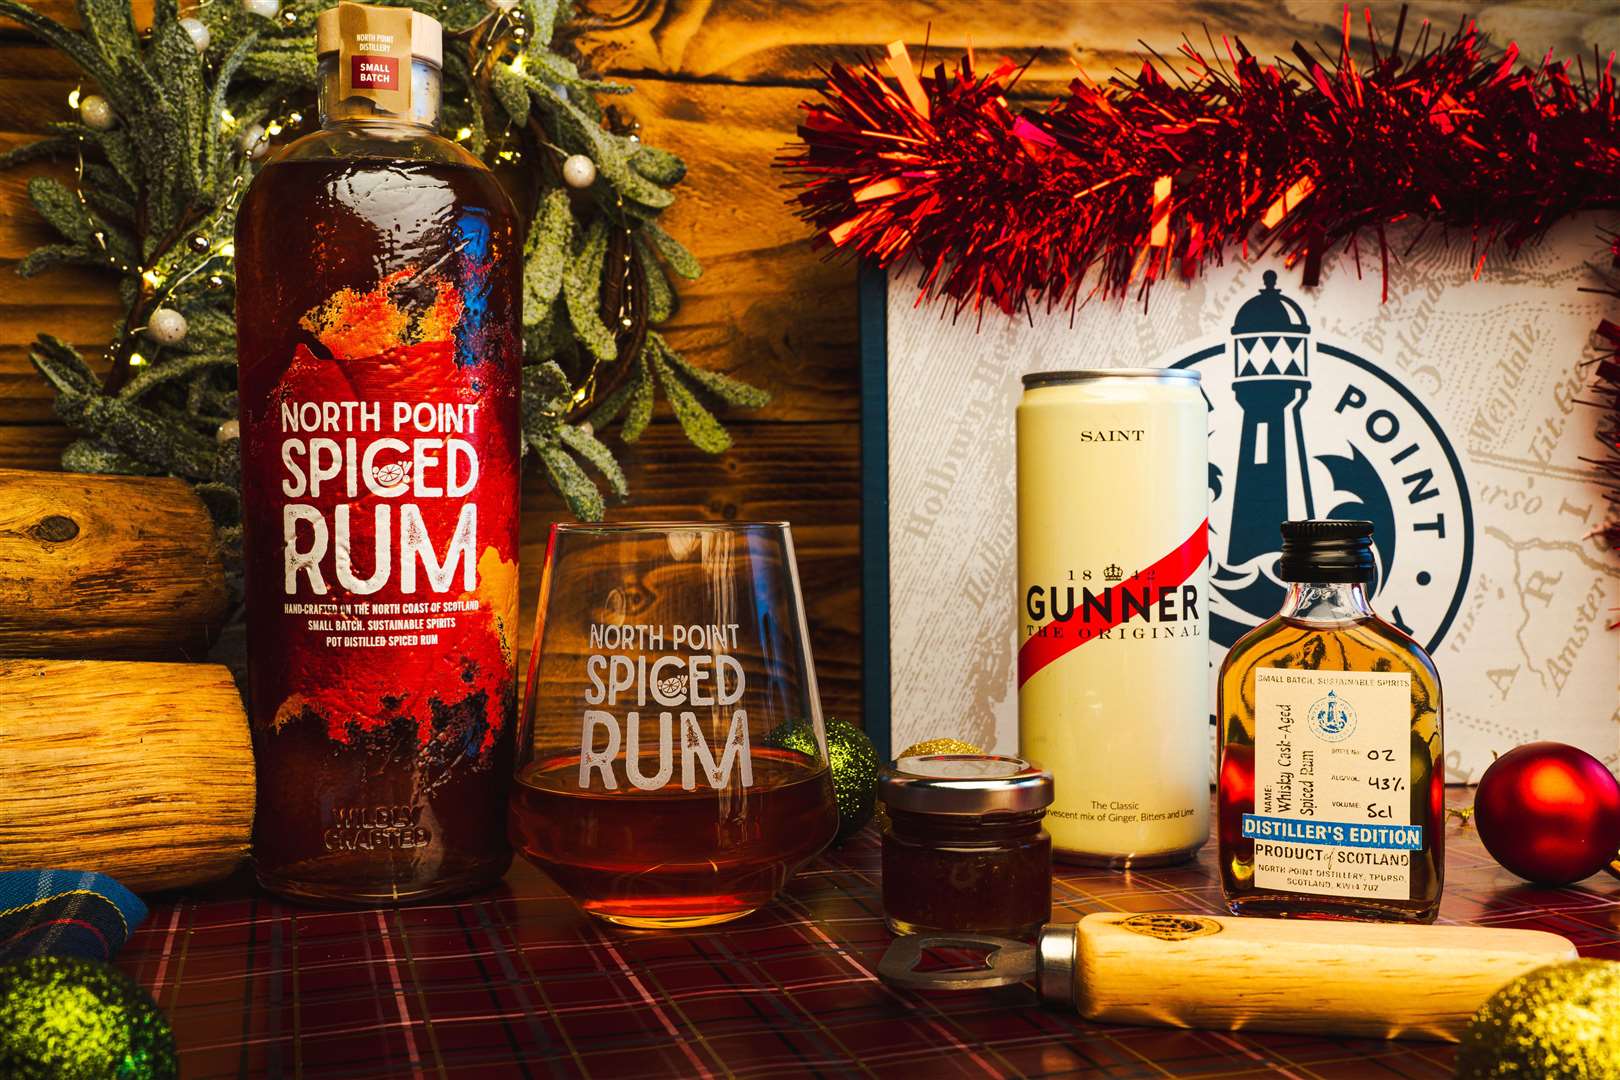 Festive spiced rum package.